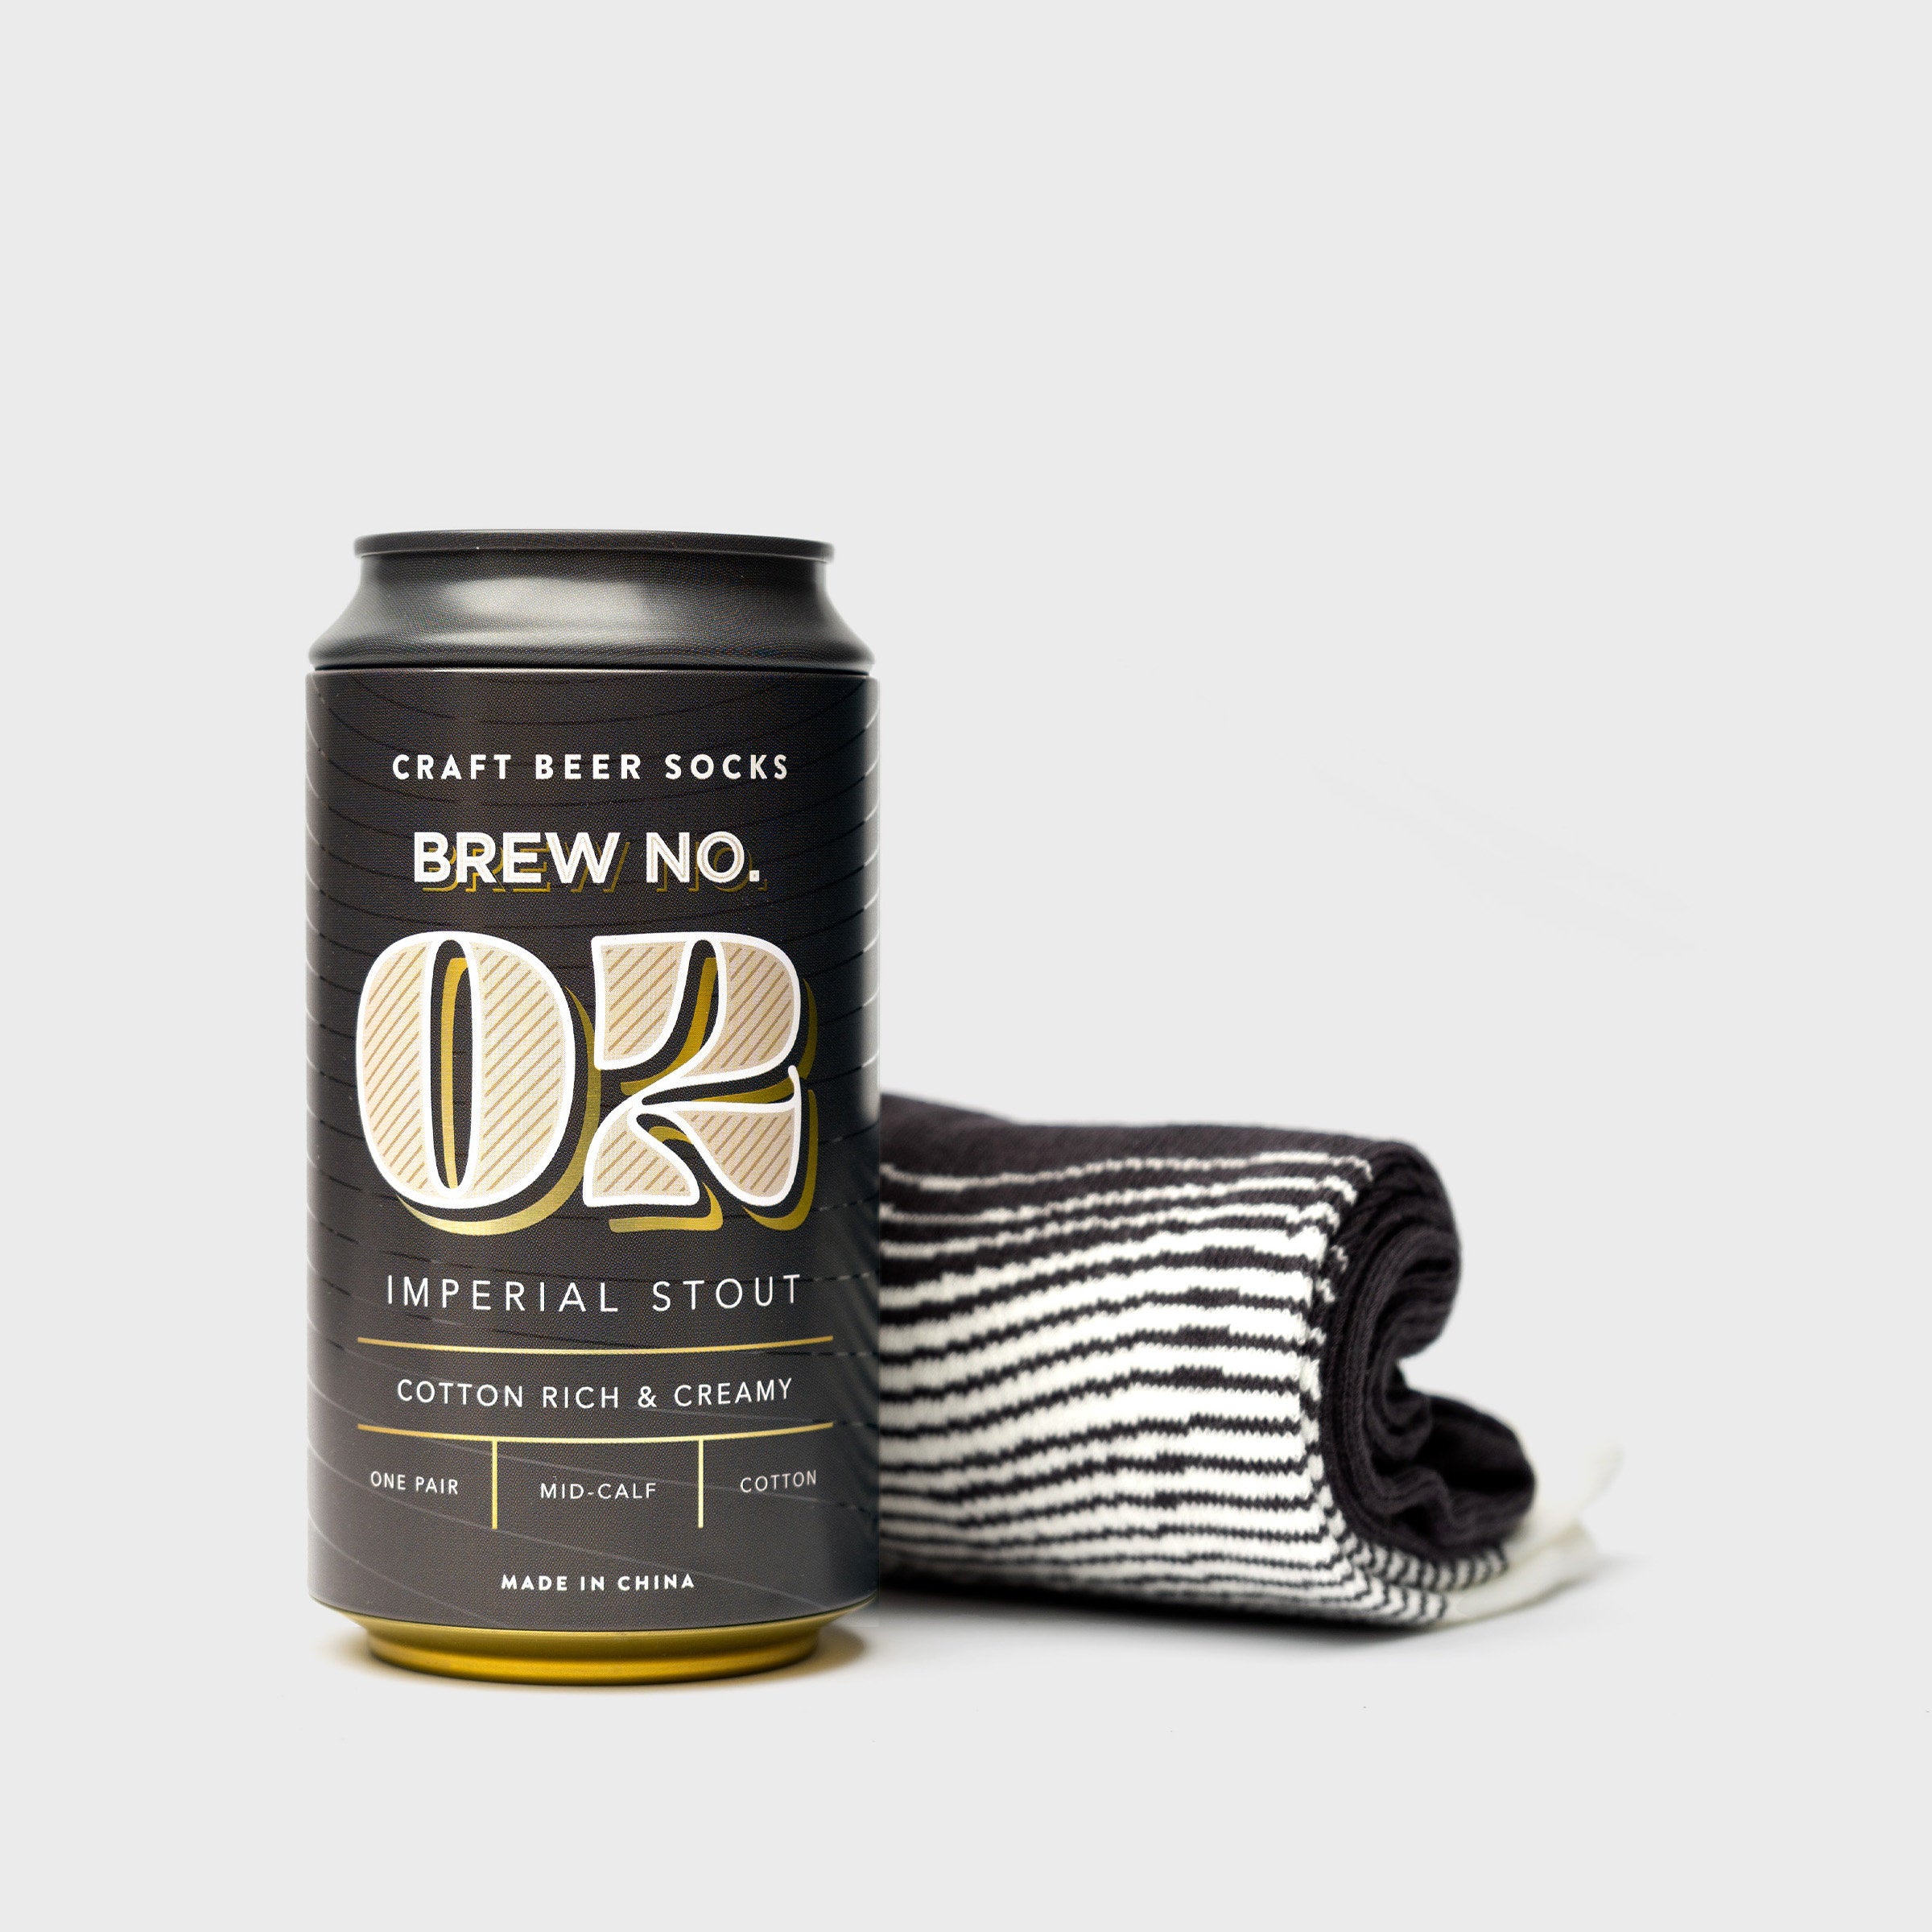 IMPERIAL STOUT BEER SOCKS IN A TIN